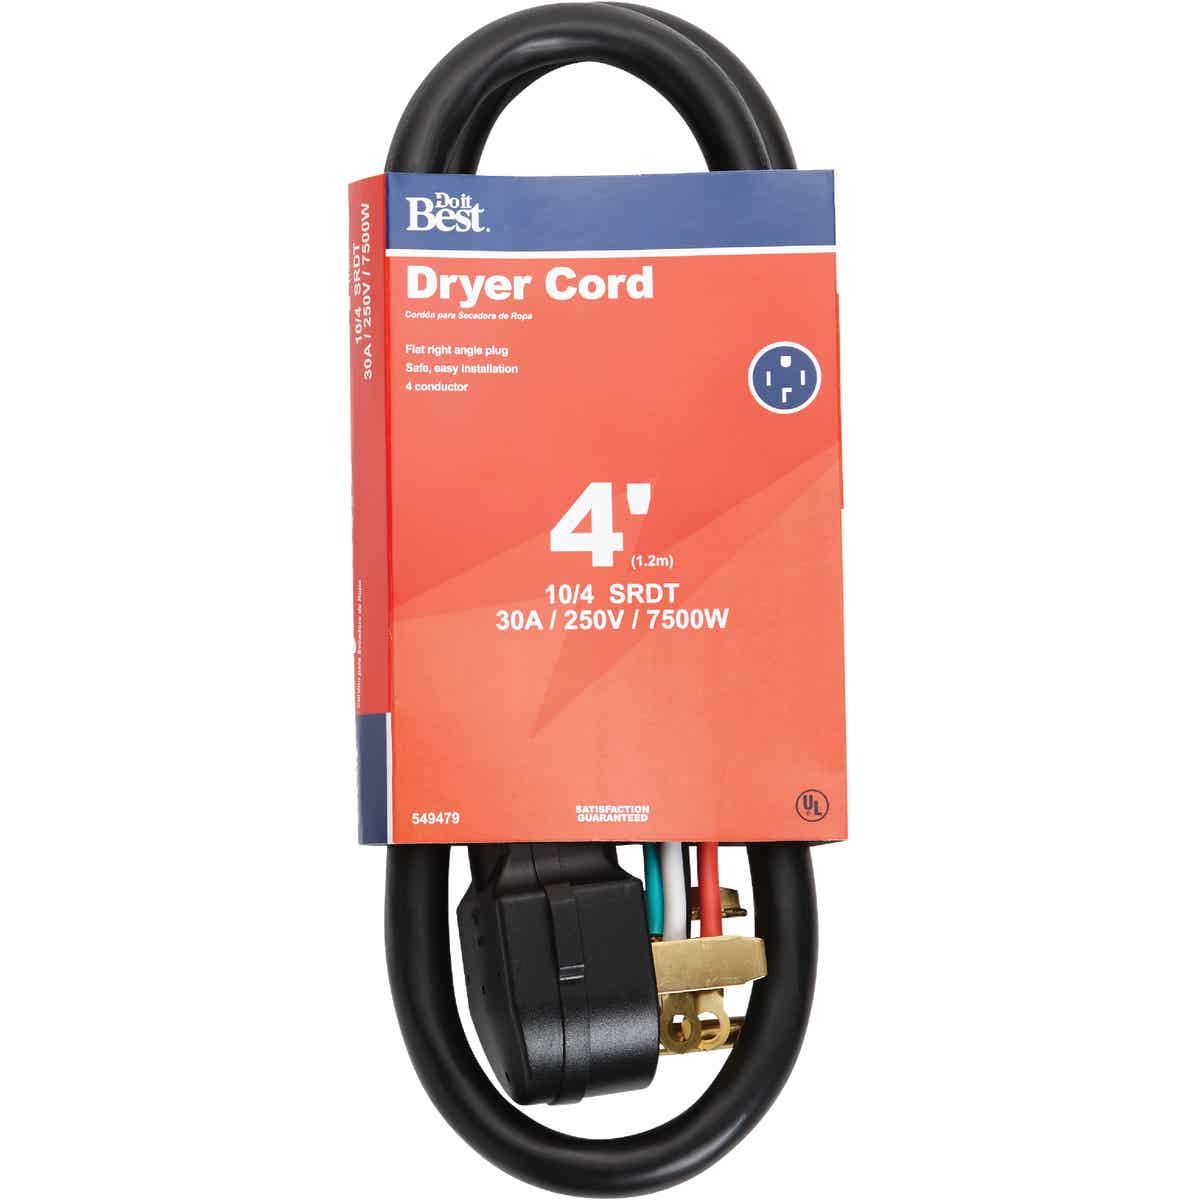 Dryer Power Supply Cord Woods Extension Cords - Black, 4', 30 Amp